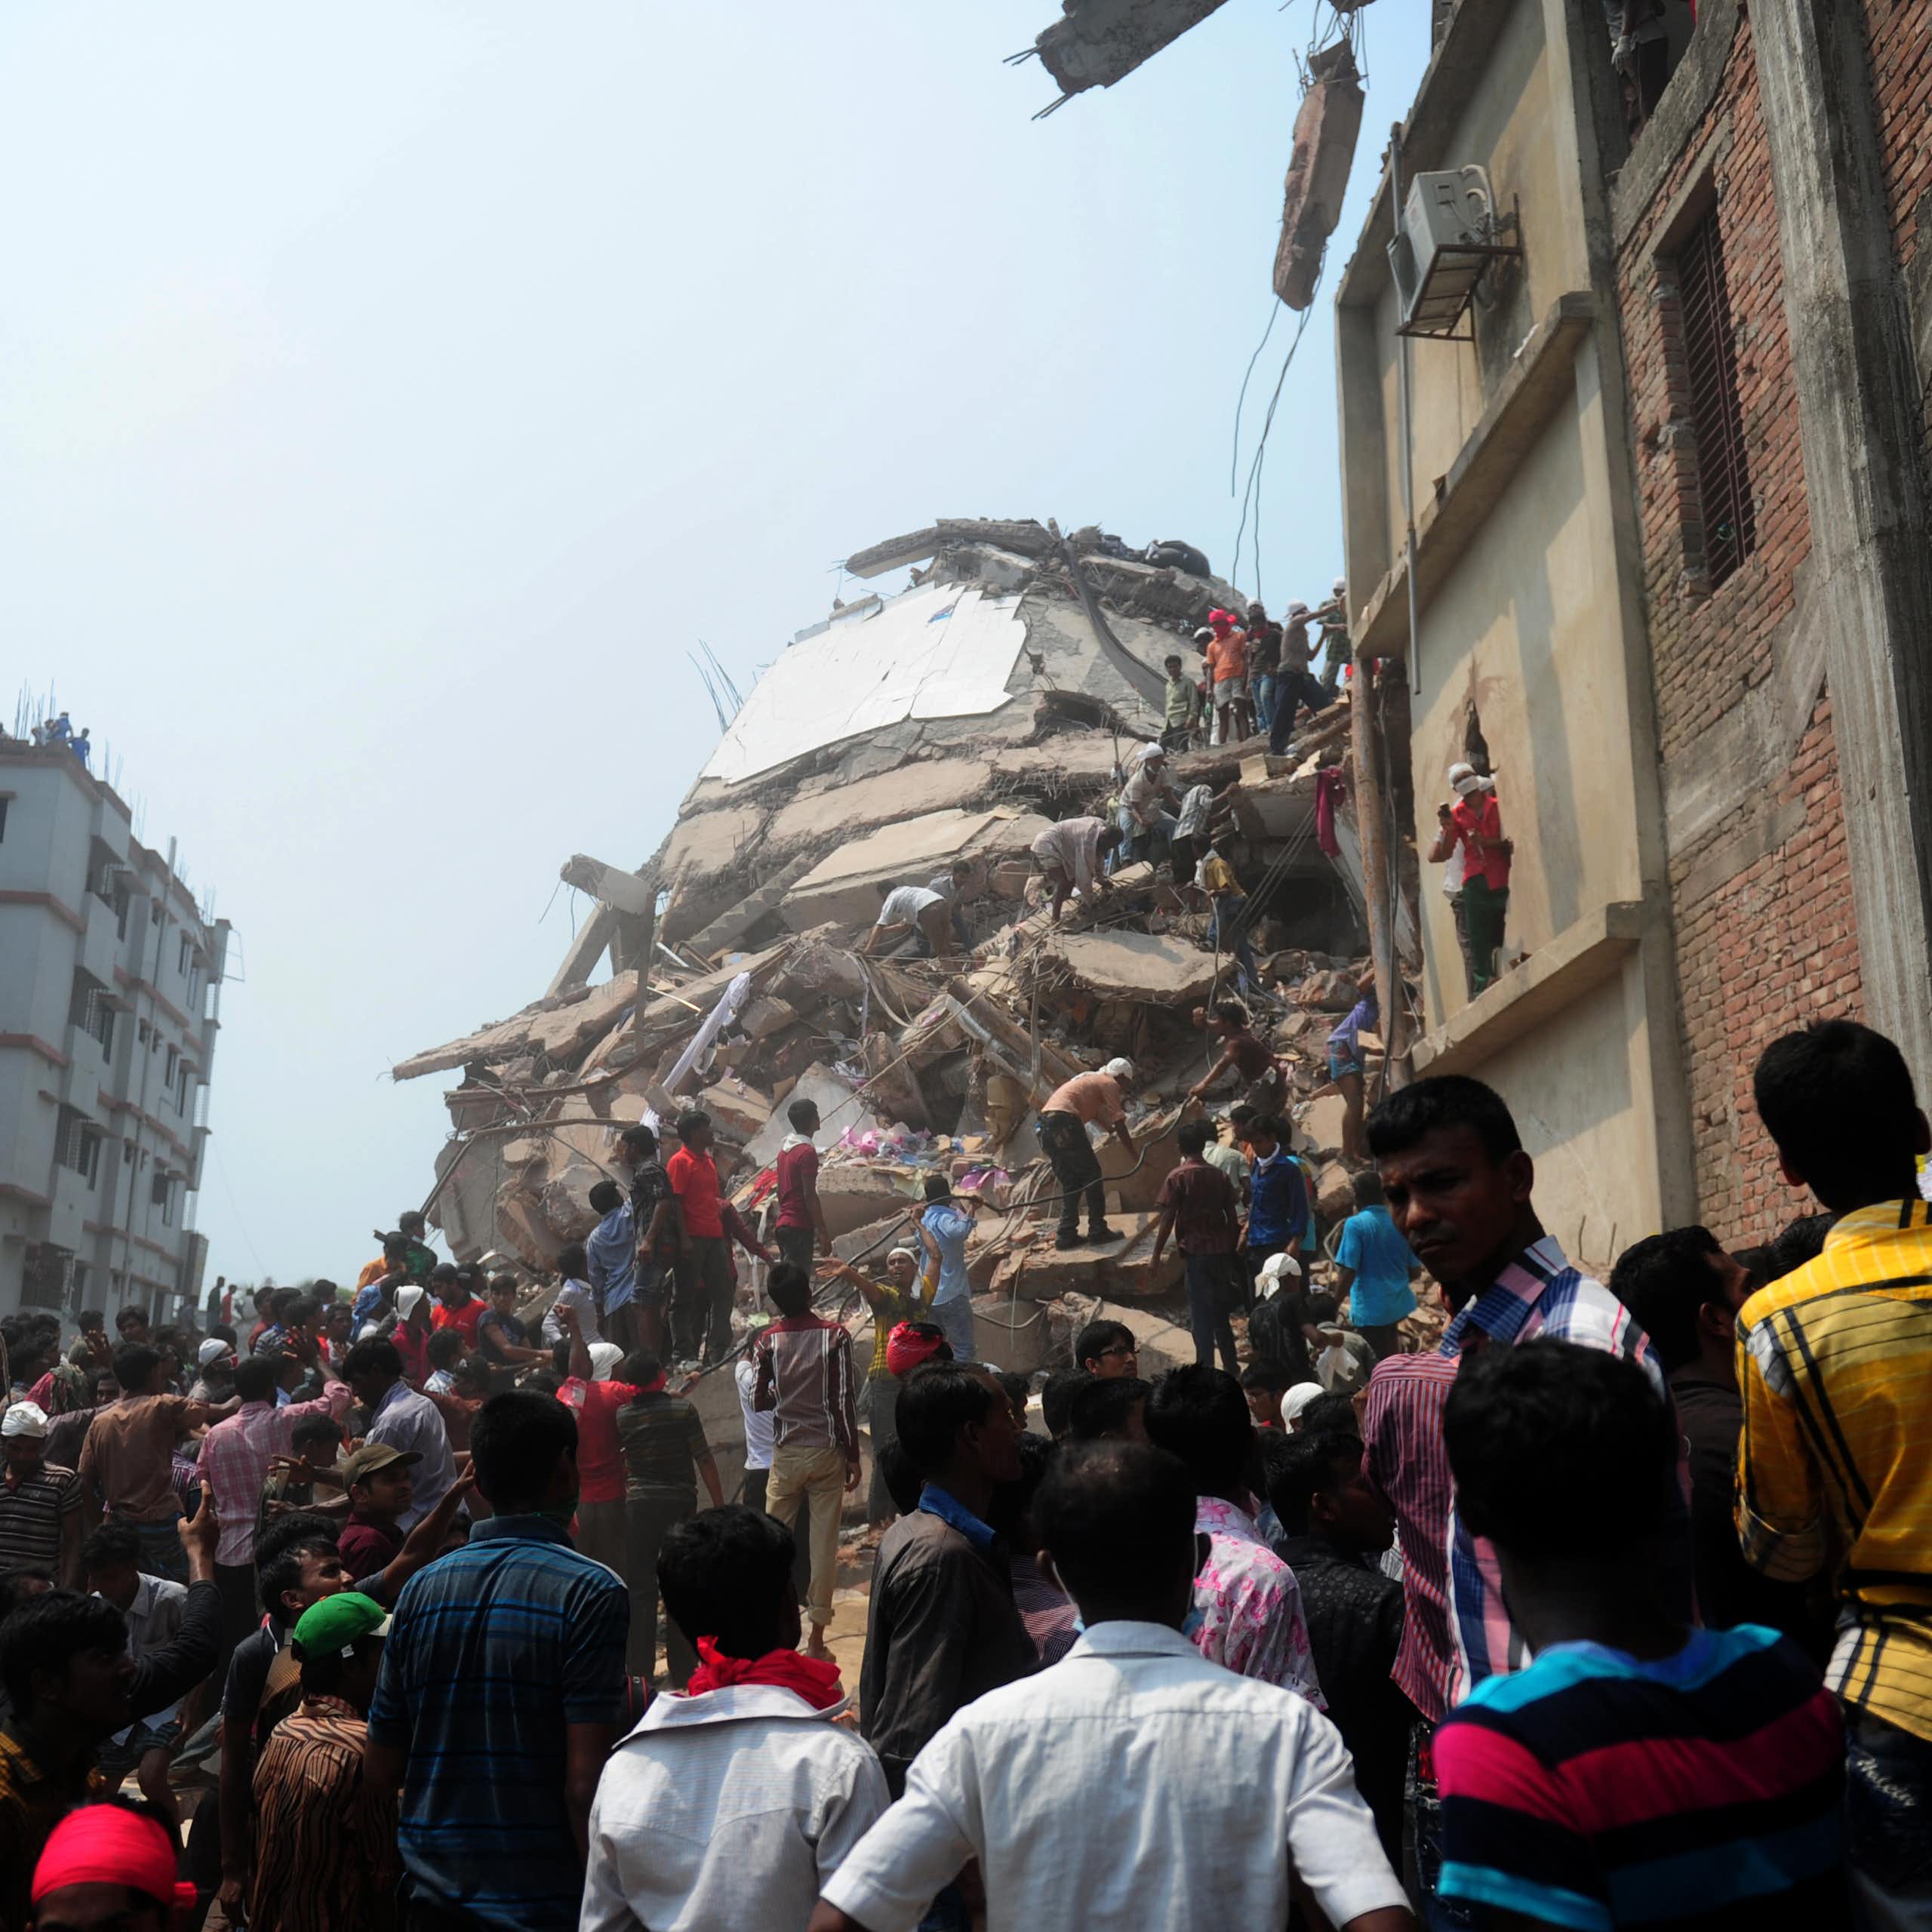 10 years after the Rana Plaza collapse, fashion has yet to slow down